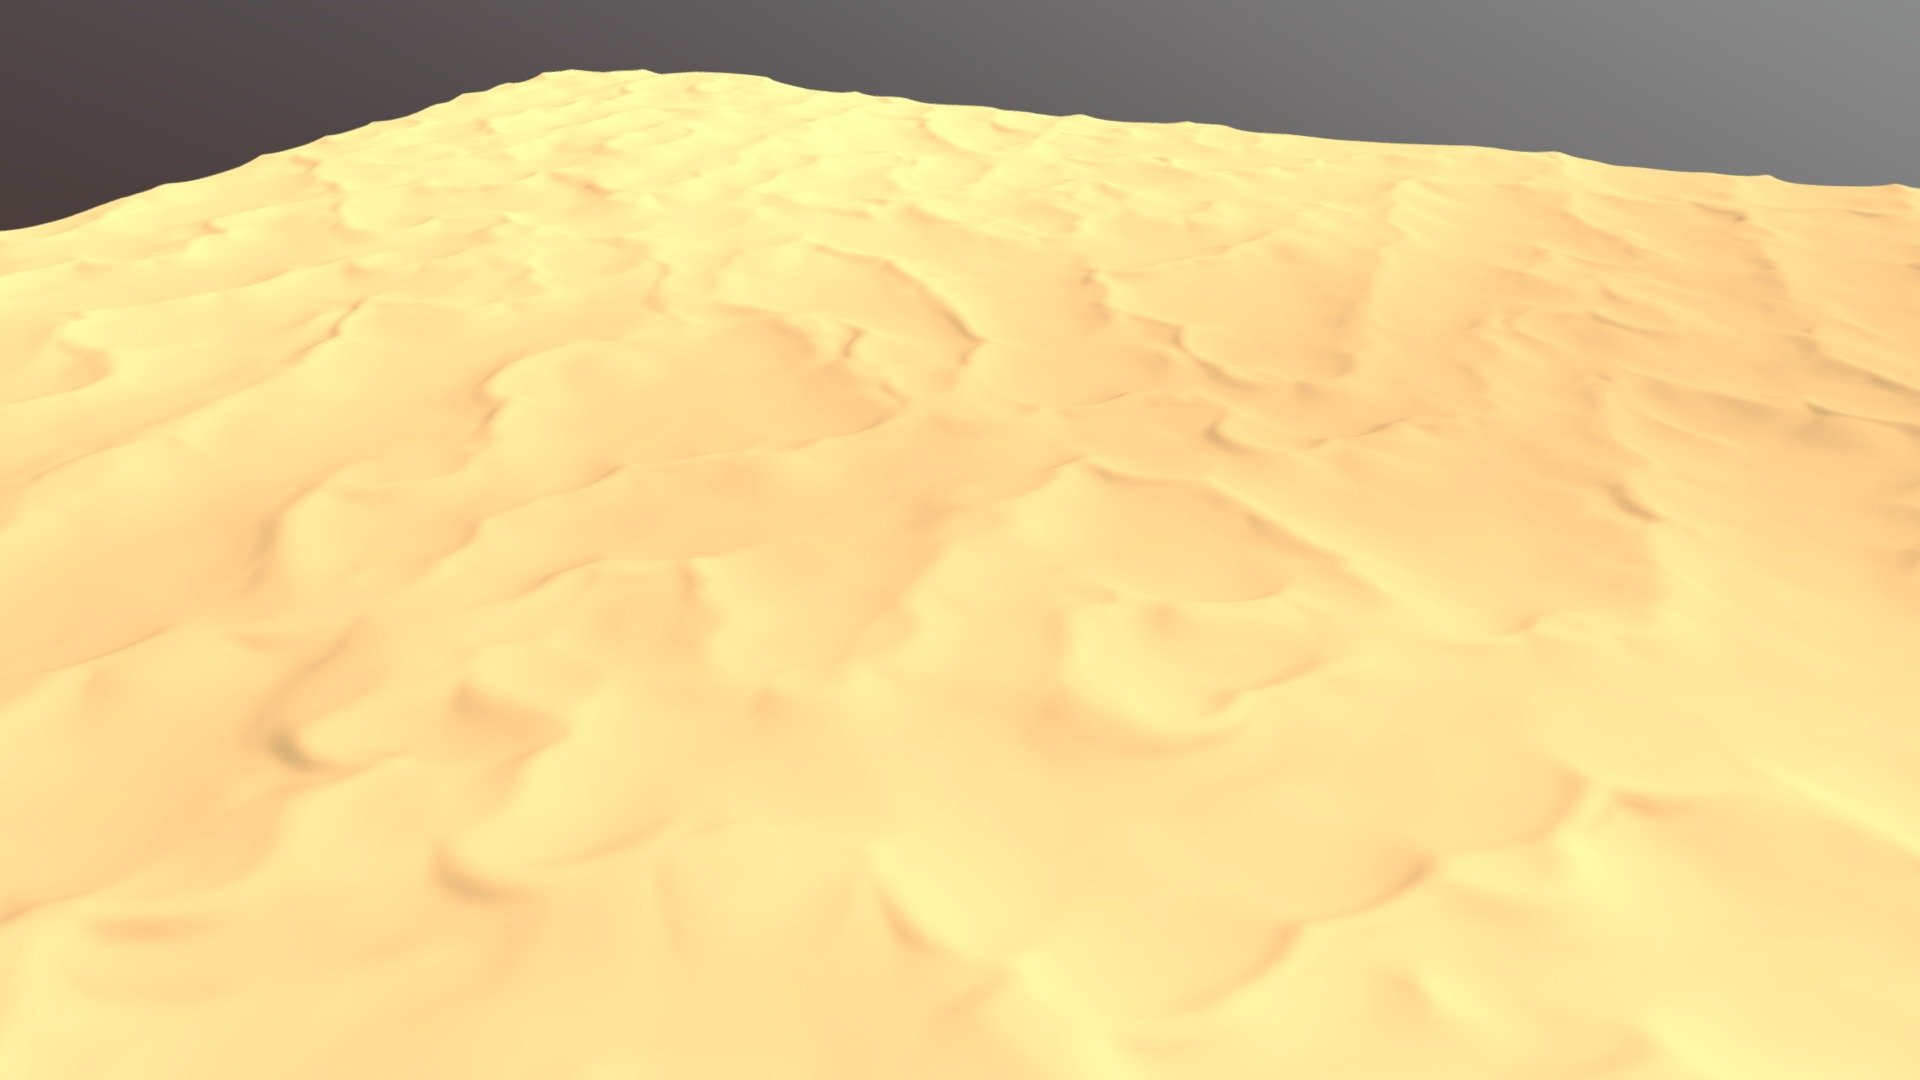 Extremely simple hot desert biome

Any biome in my profile with the header TEC denotes a biome relating to a game I'm developing. All of these files are still free to use commercially under the CC Attribution license, as with everything else in my profile 3d model